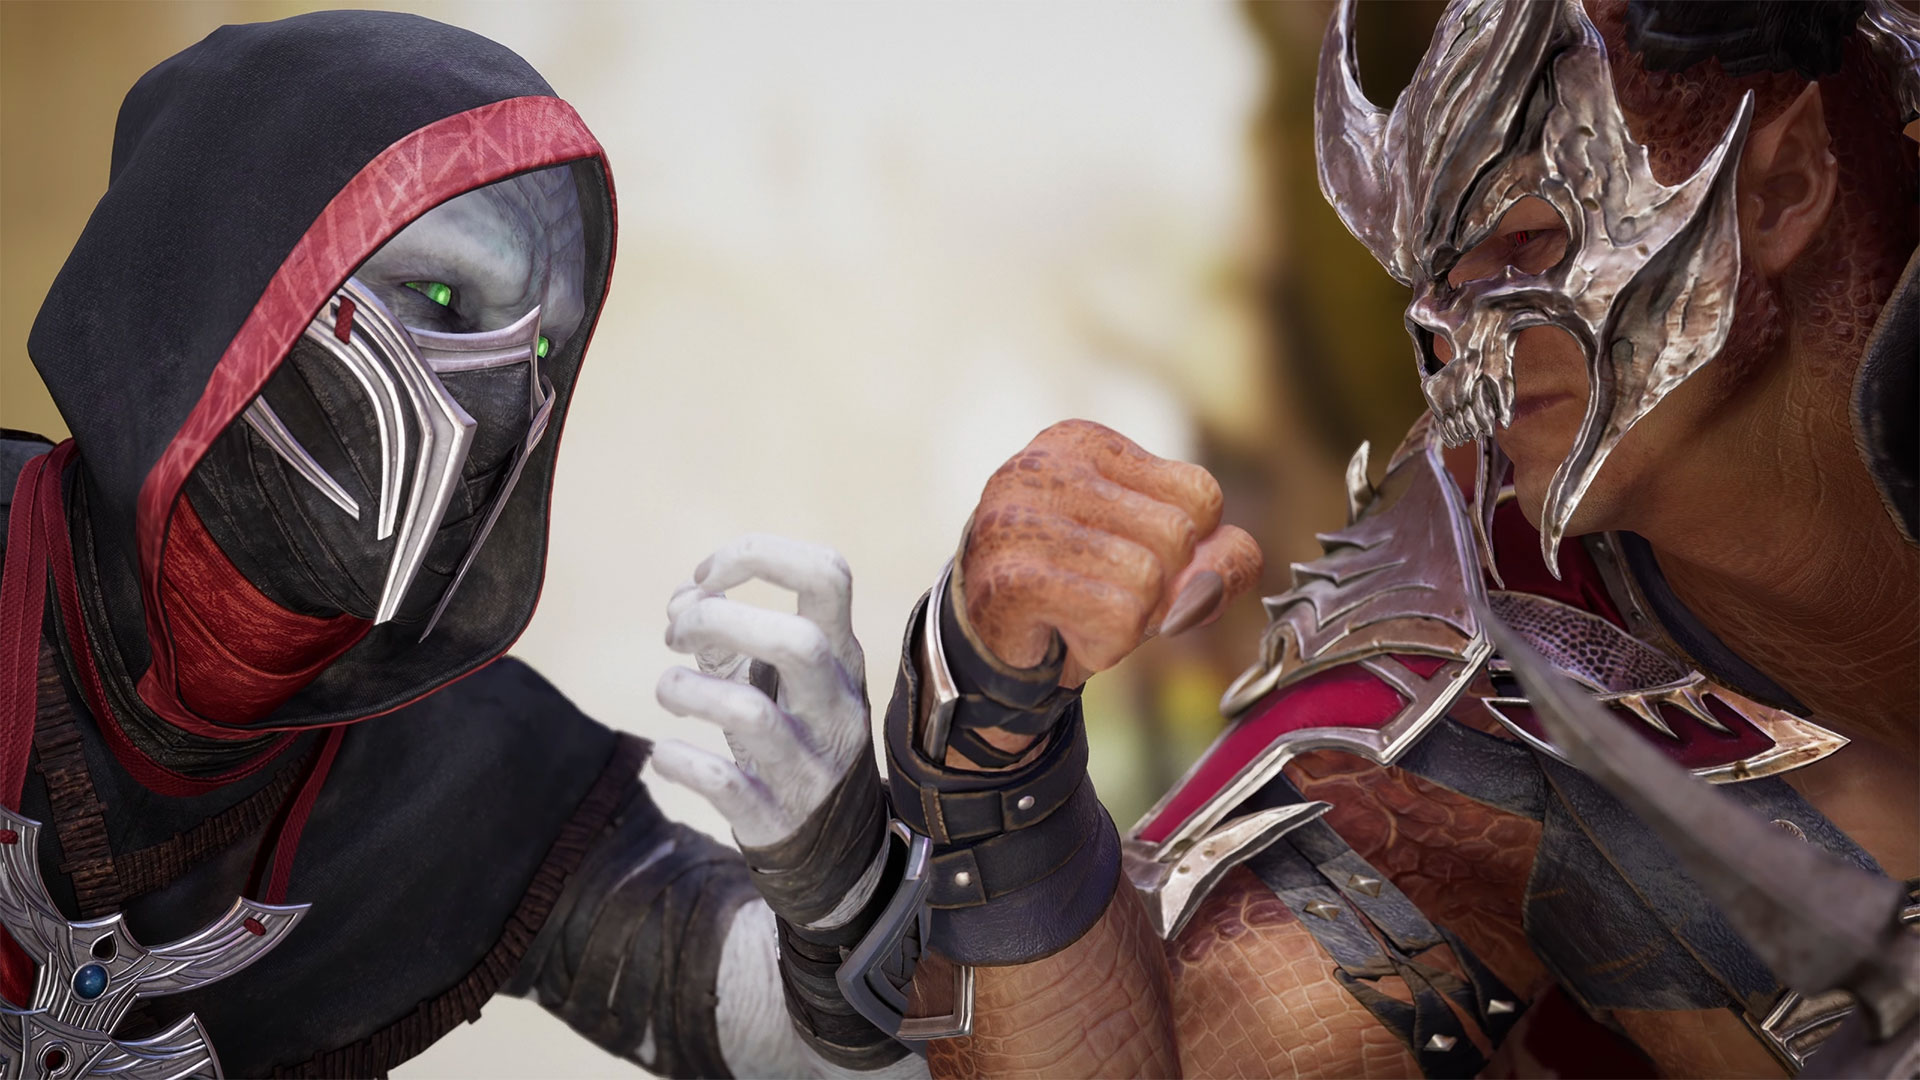 Ermac joins Mortal Kombat 1 in Early Access April 16